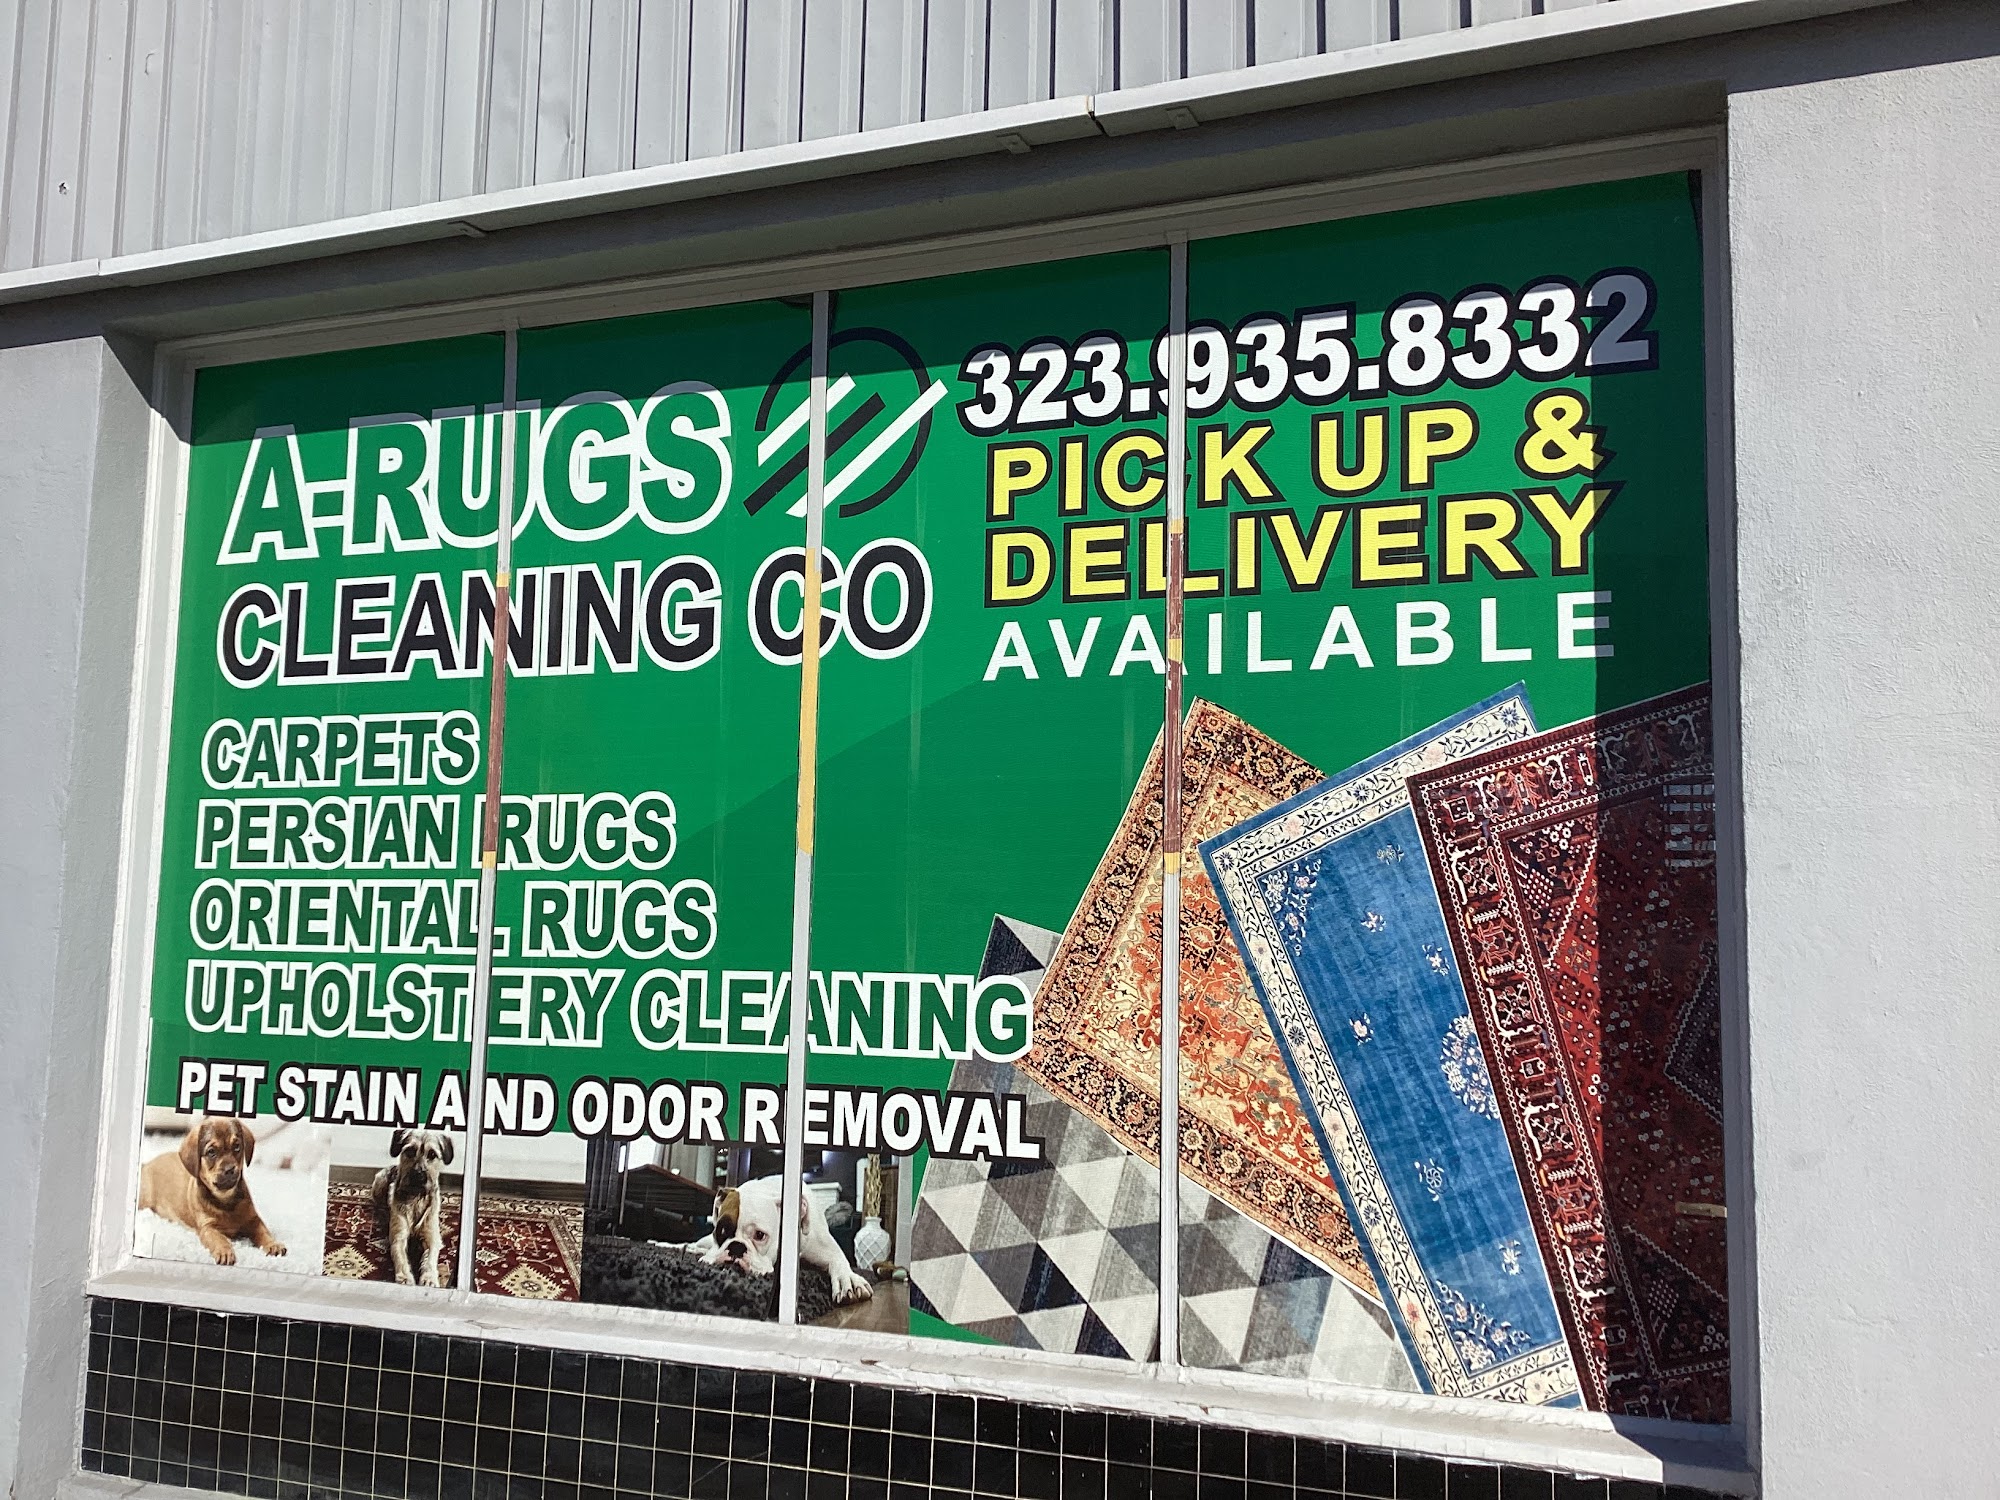 A-Rugs Cleaning Co.